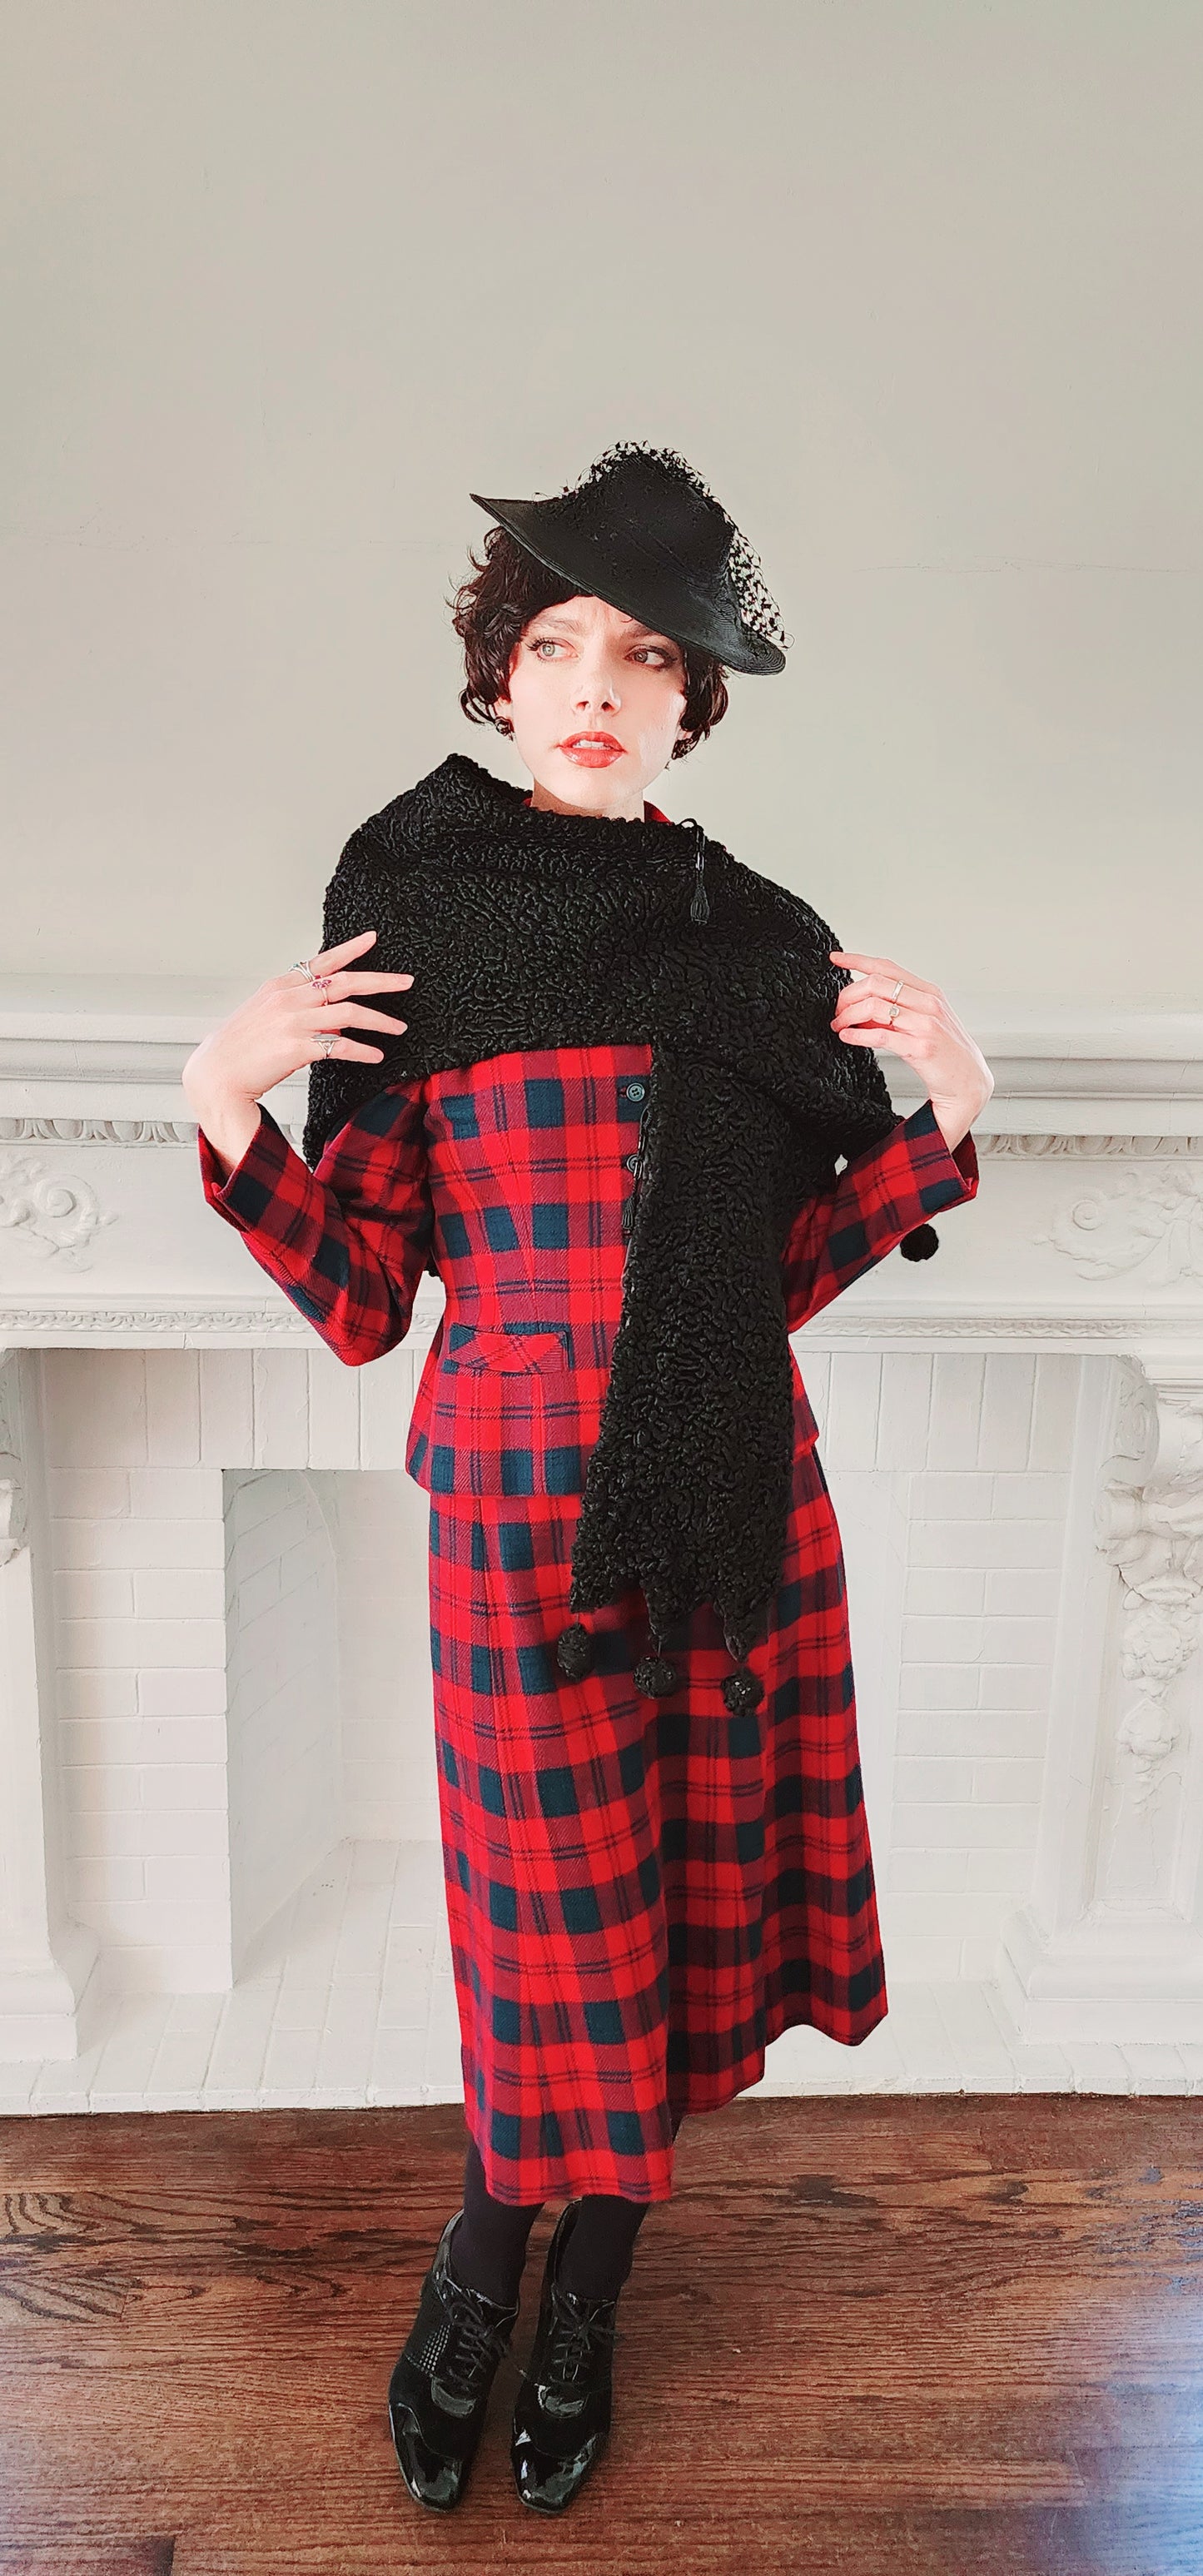 40s Shrug in Black Curly Lamb Persian Wool Wrap Stole by Ferris Bros Furs Chicago